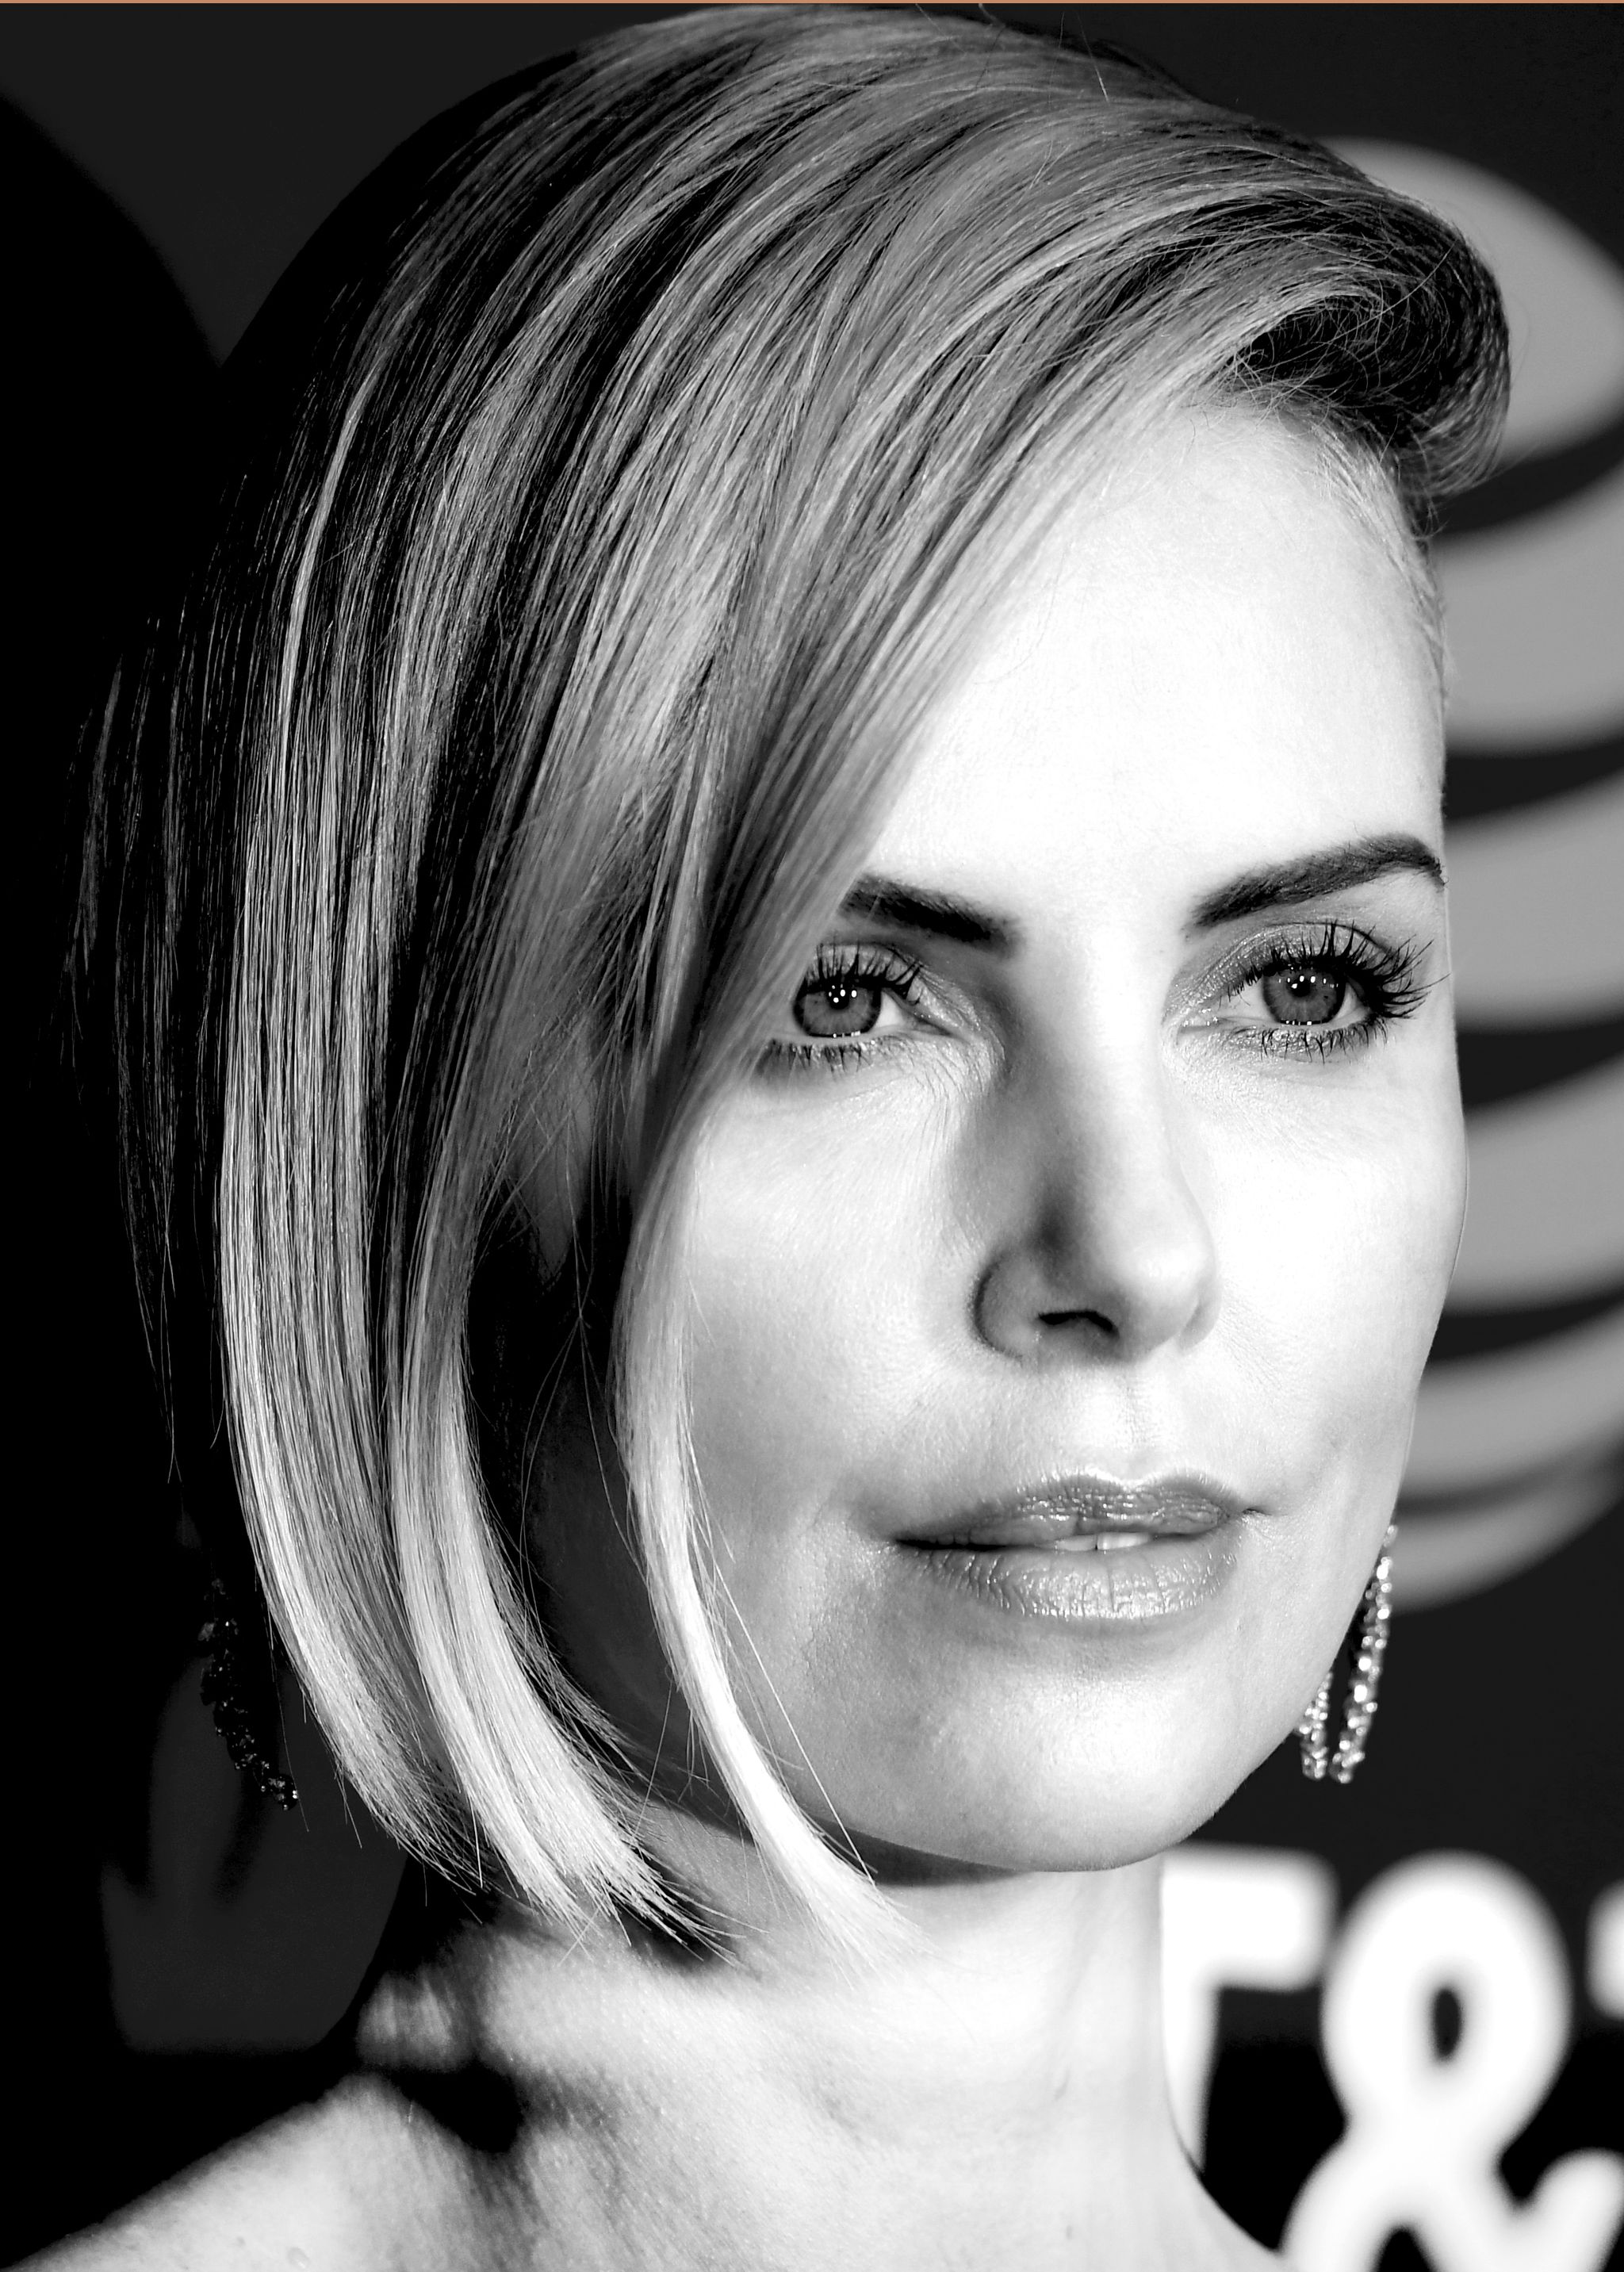 Hair, Face, Eyebrow, Hairstyle, Lip, Chin, Beauty, Blond, Head, Black-and-white, 